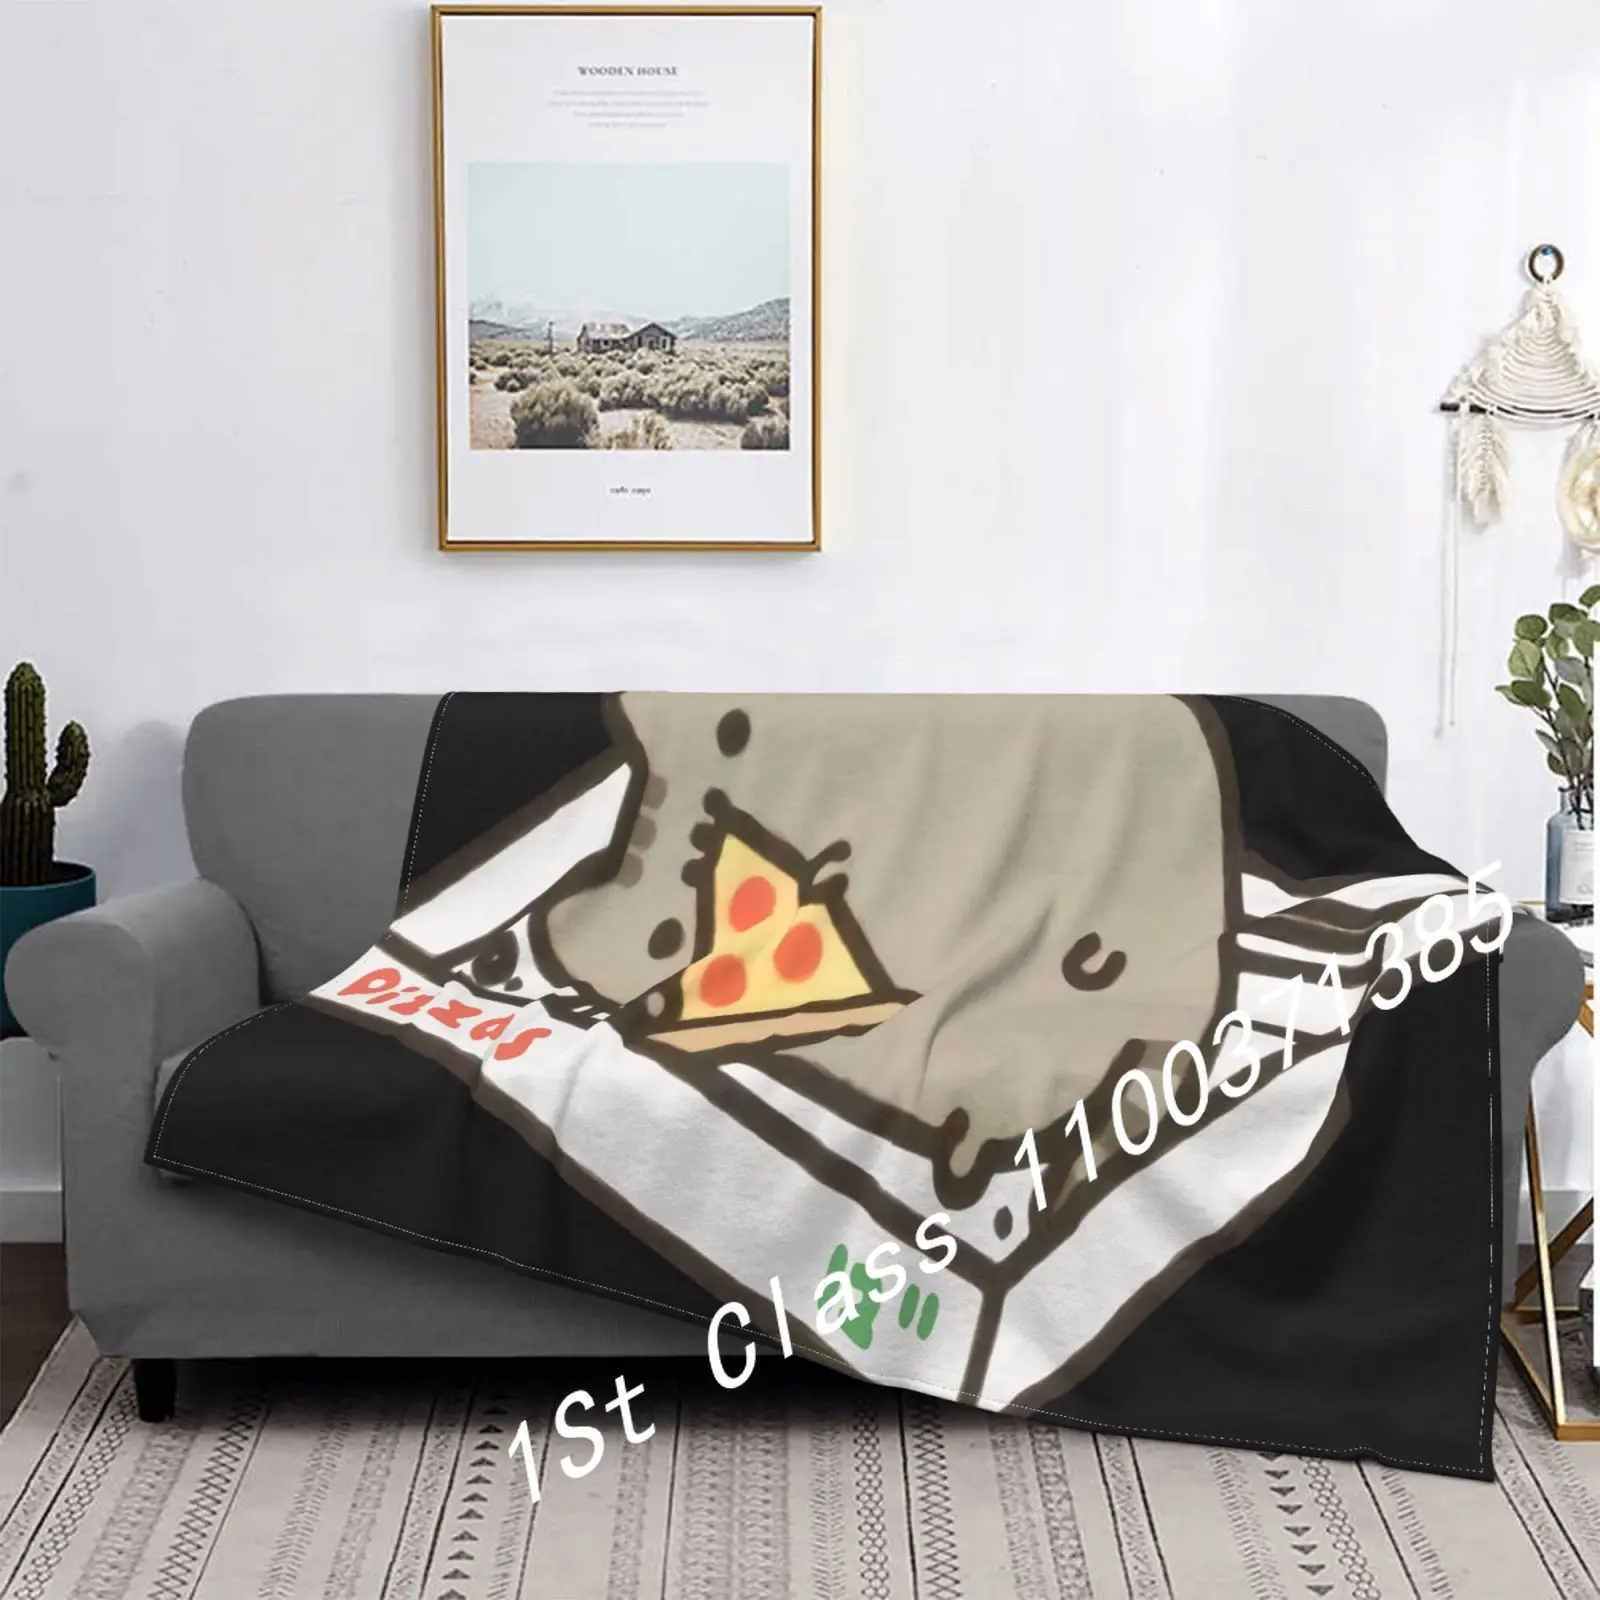 

Pusheen The Cat Pizza Box Pusheen Blanket Anime Plush Bedspread In The Bedroom Beach Blanket Cover Bed Linen Blankets For Beds